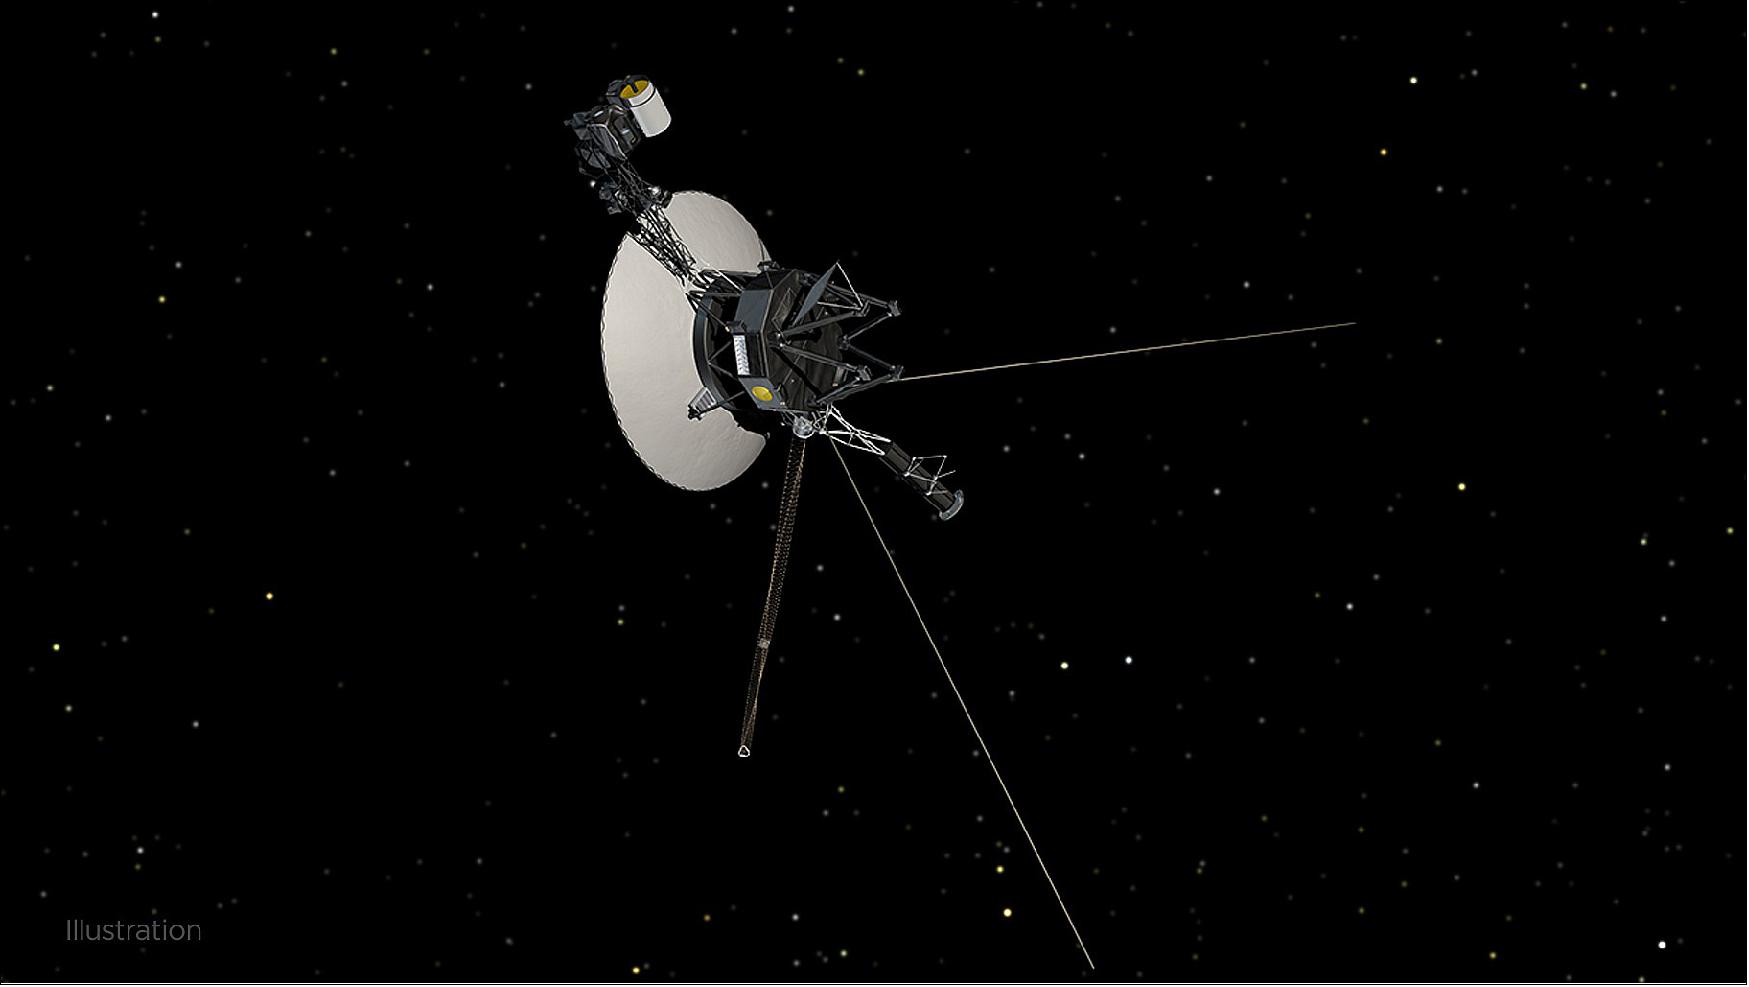 Figure 1: NASA’s Voyager 1 spacecraft, shown in this illustration, has been exploring our solar system since 1977, along with its twin, Voyager 2 (image credit: NASA/JPL-Caltech)